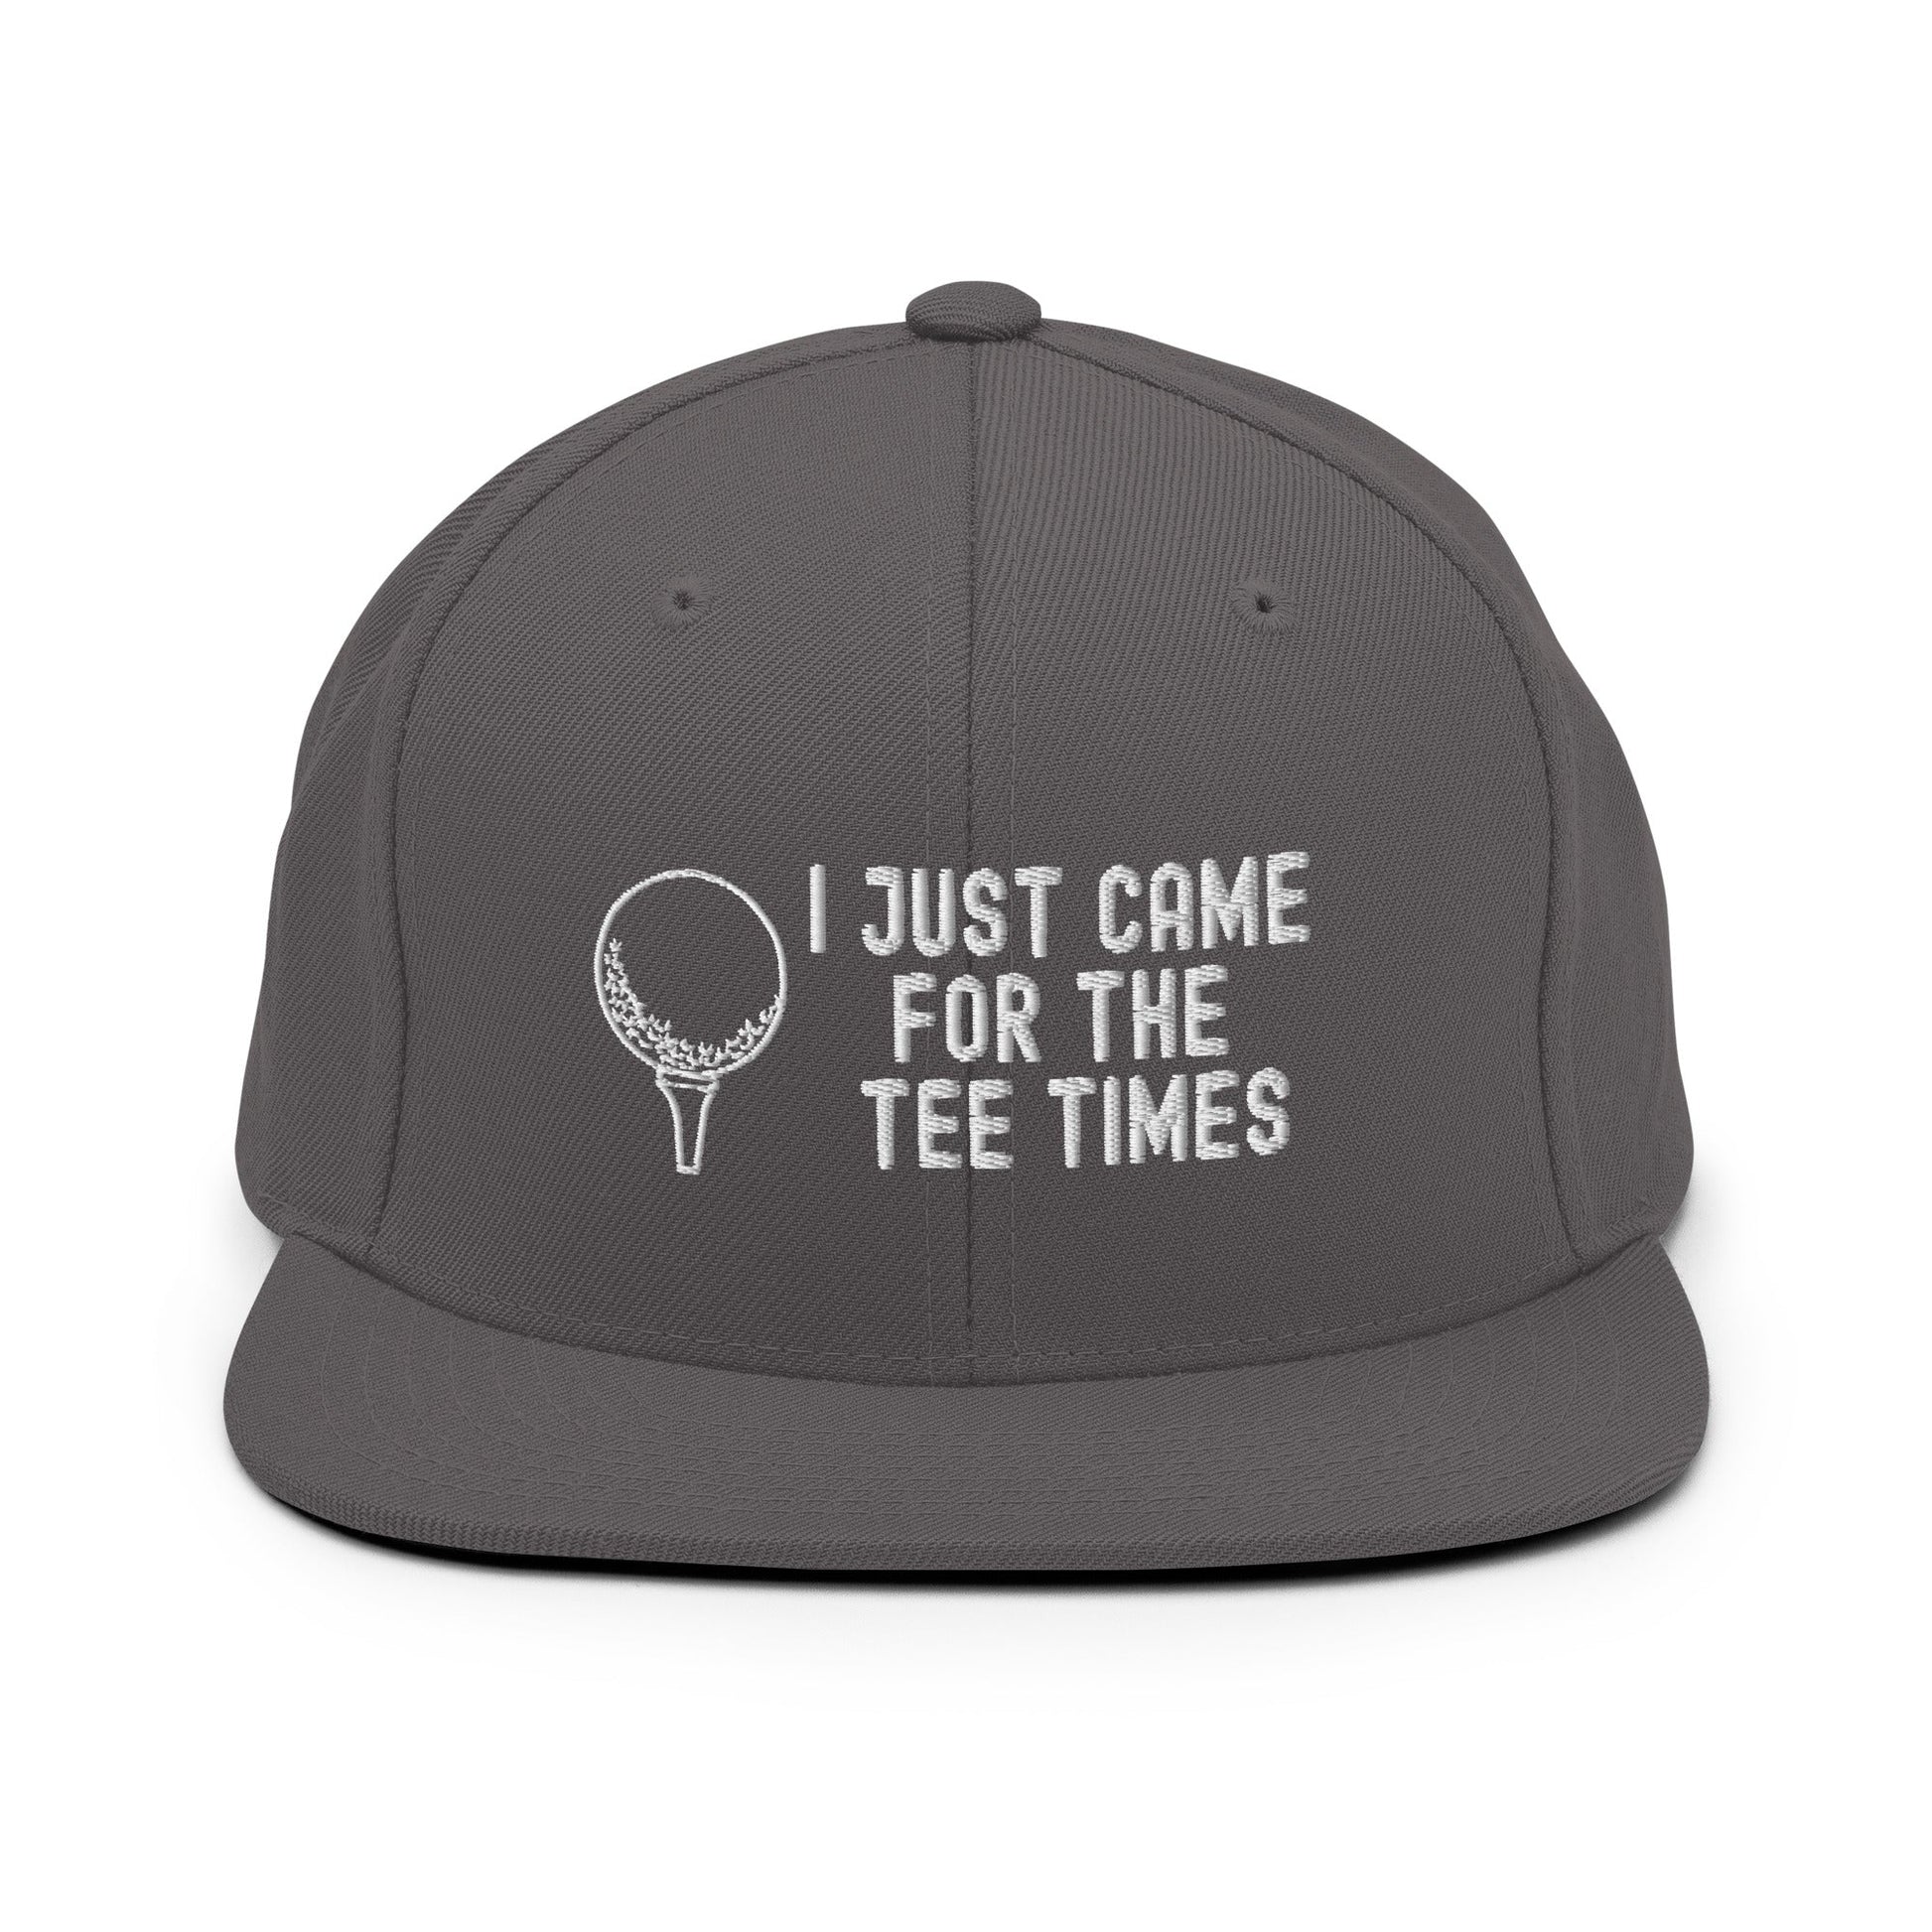 Funny Golfer Gifts  Snapback Hat Dark Grey I Just Came For The Tee Times Snapback Hat